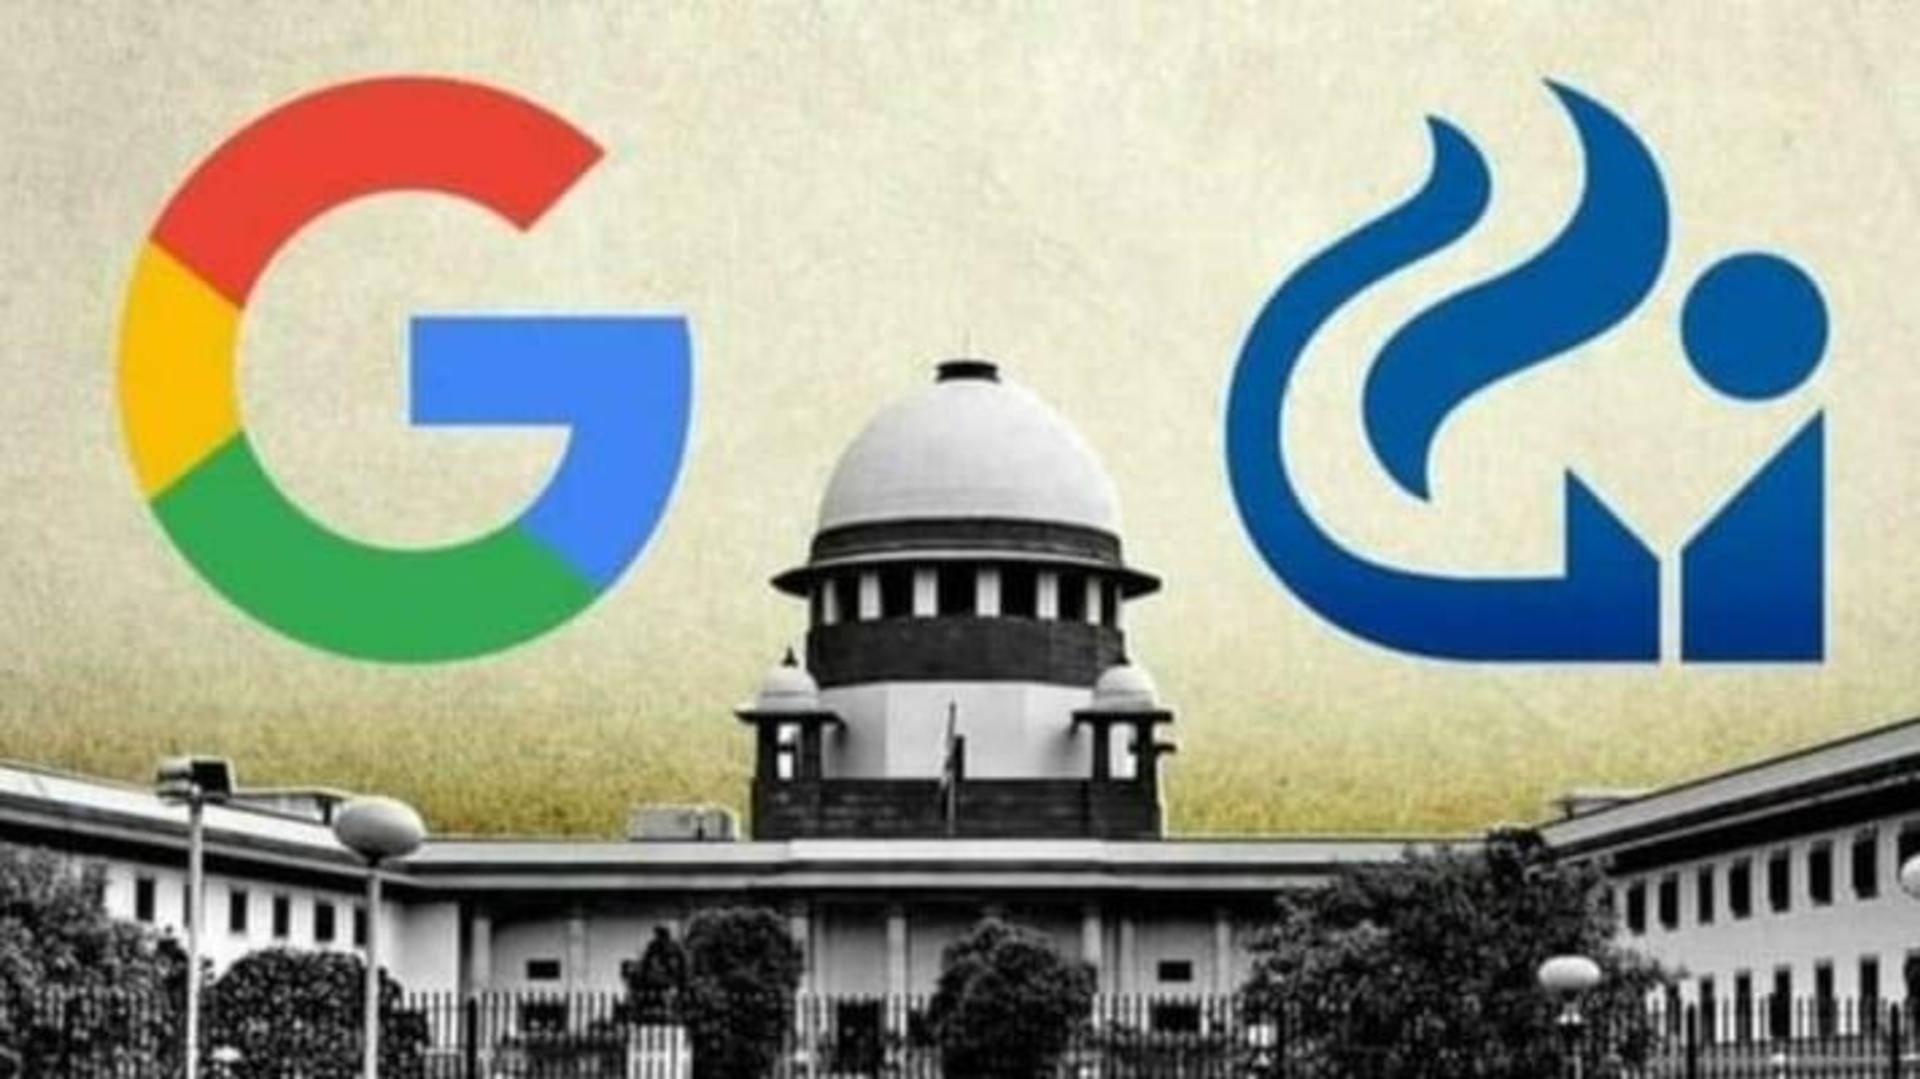 Google withdraws SC appeal against NCLAT order: Here's why